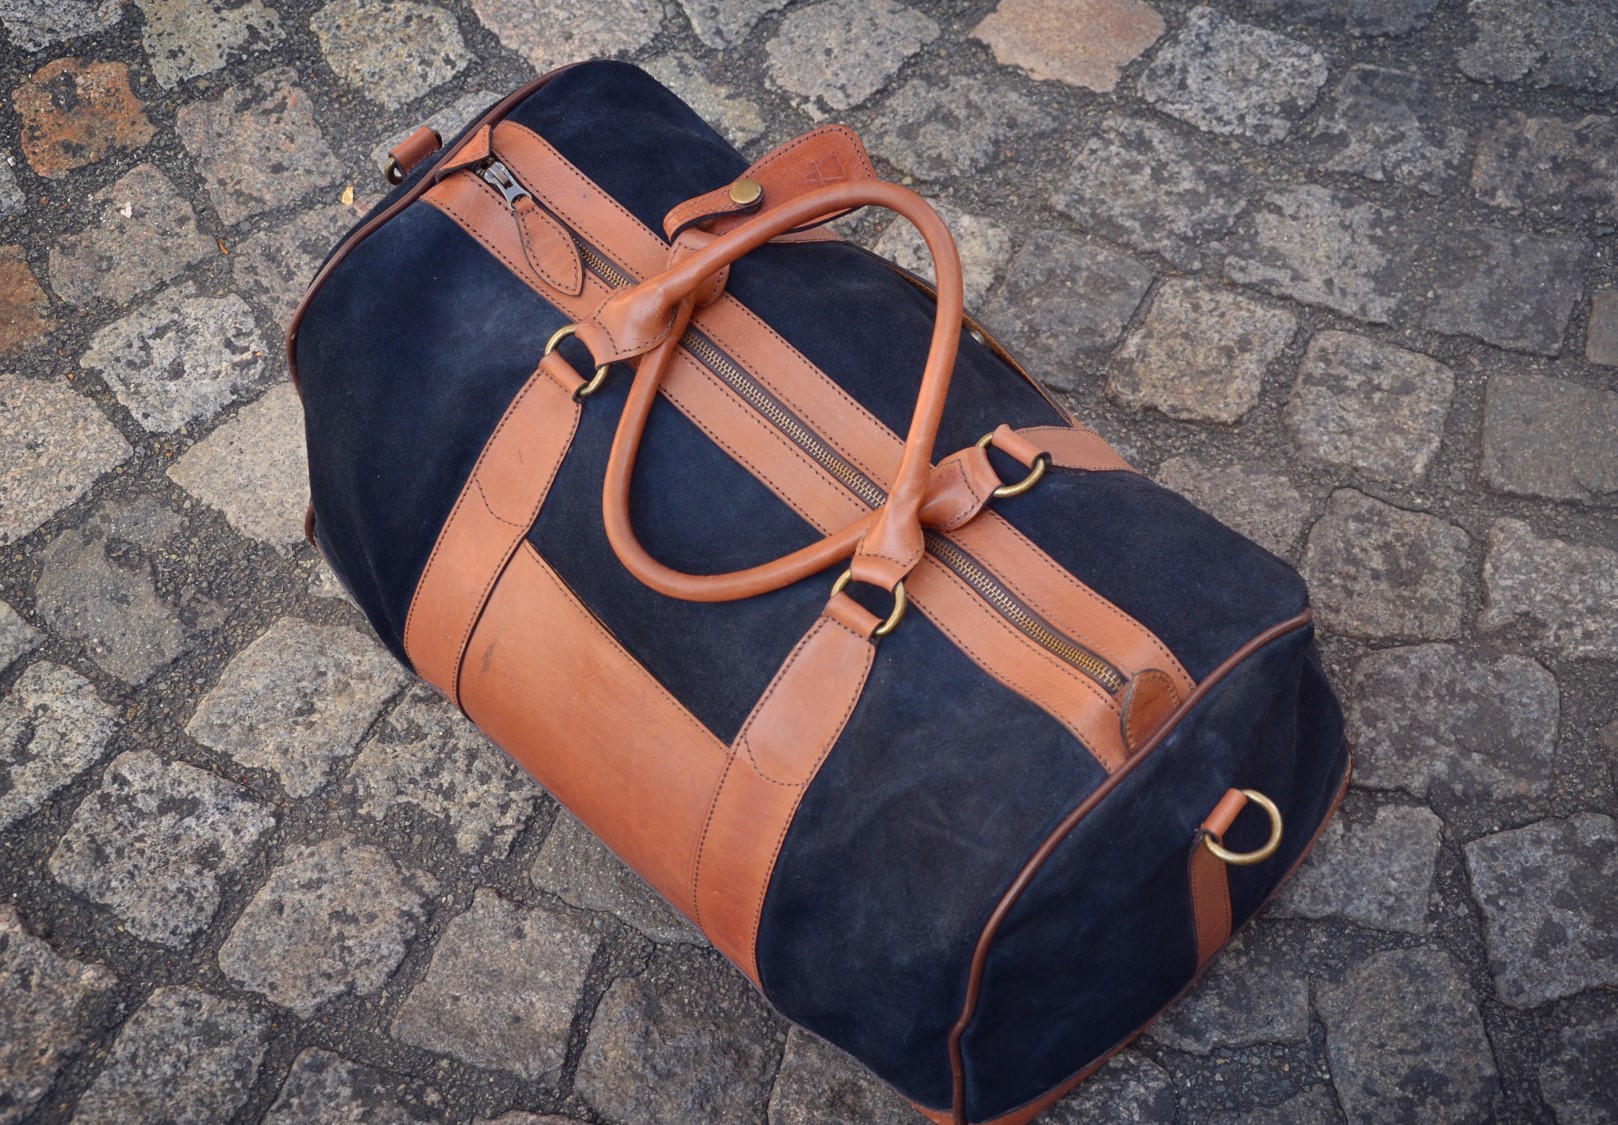 Pachamama - Weekend Bag Diego Anthracite - Leather travel bag